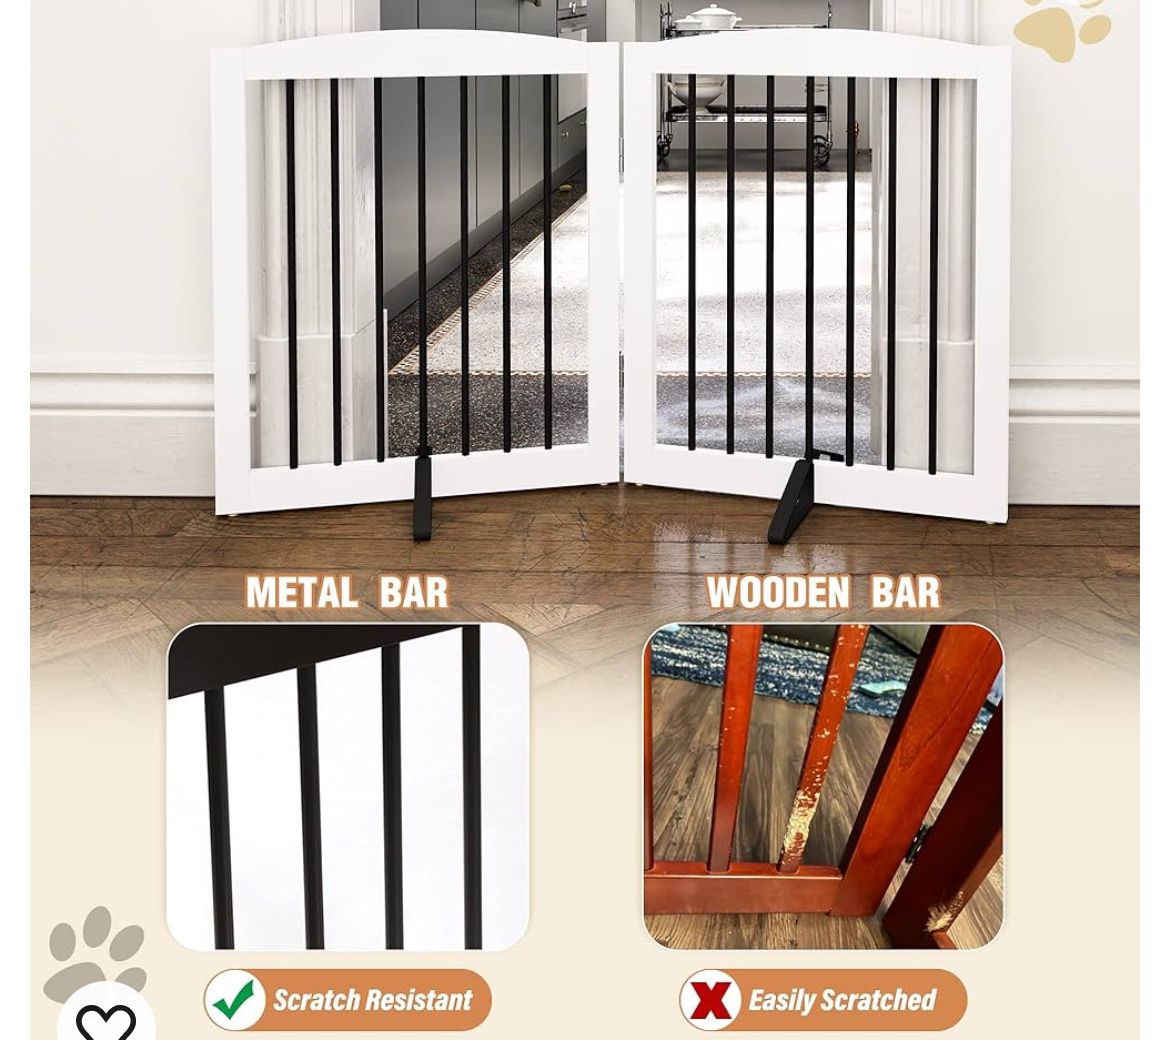 PUPETPO Freestanding Pet Gate For Dogs, Foldable Wooden Dog Gate For House, Indoor Dog Gate For Stairs, Doorways, Step Over Pet Puppy Safety Fence, Su